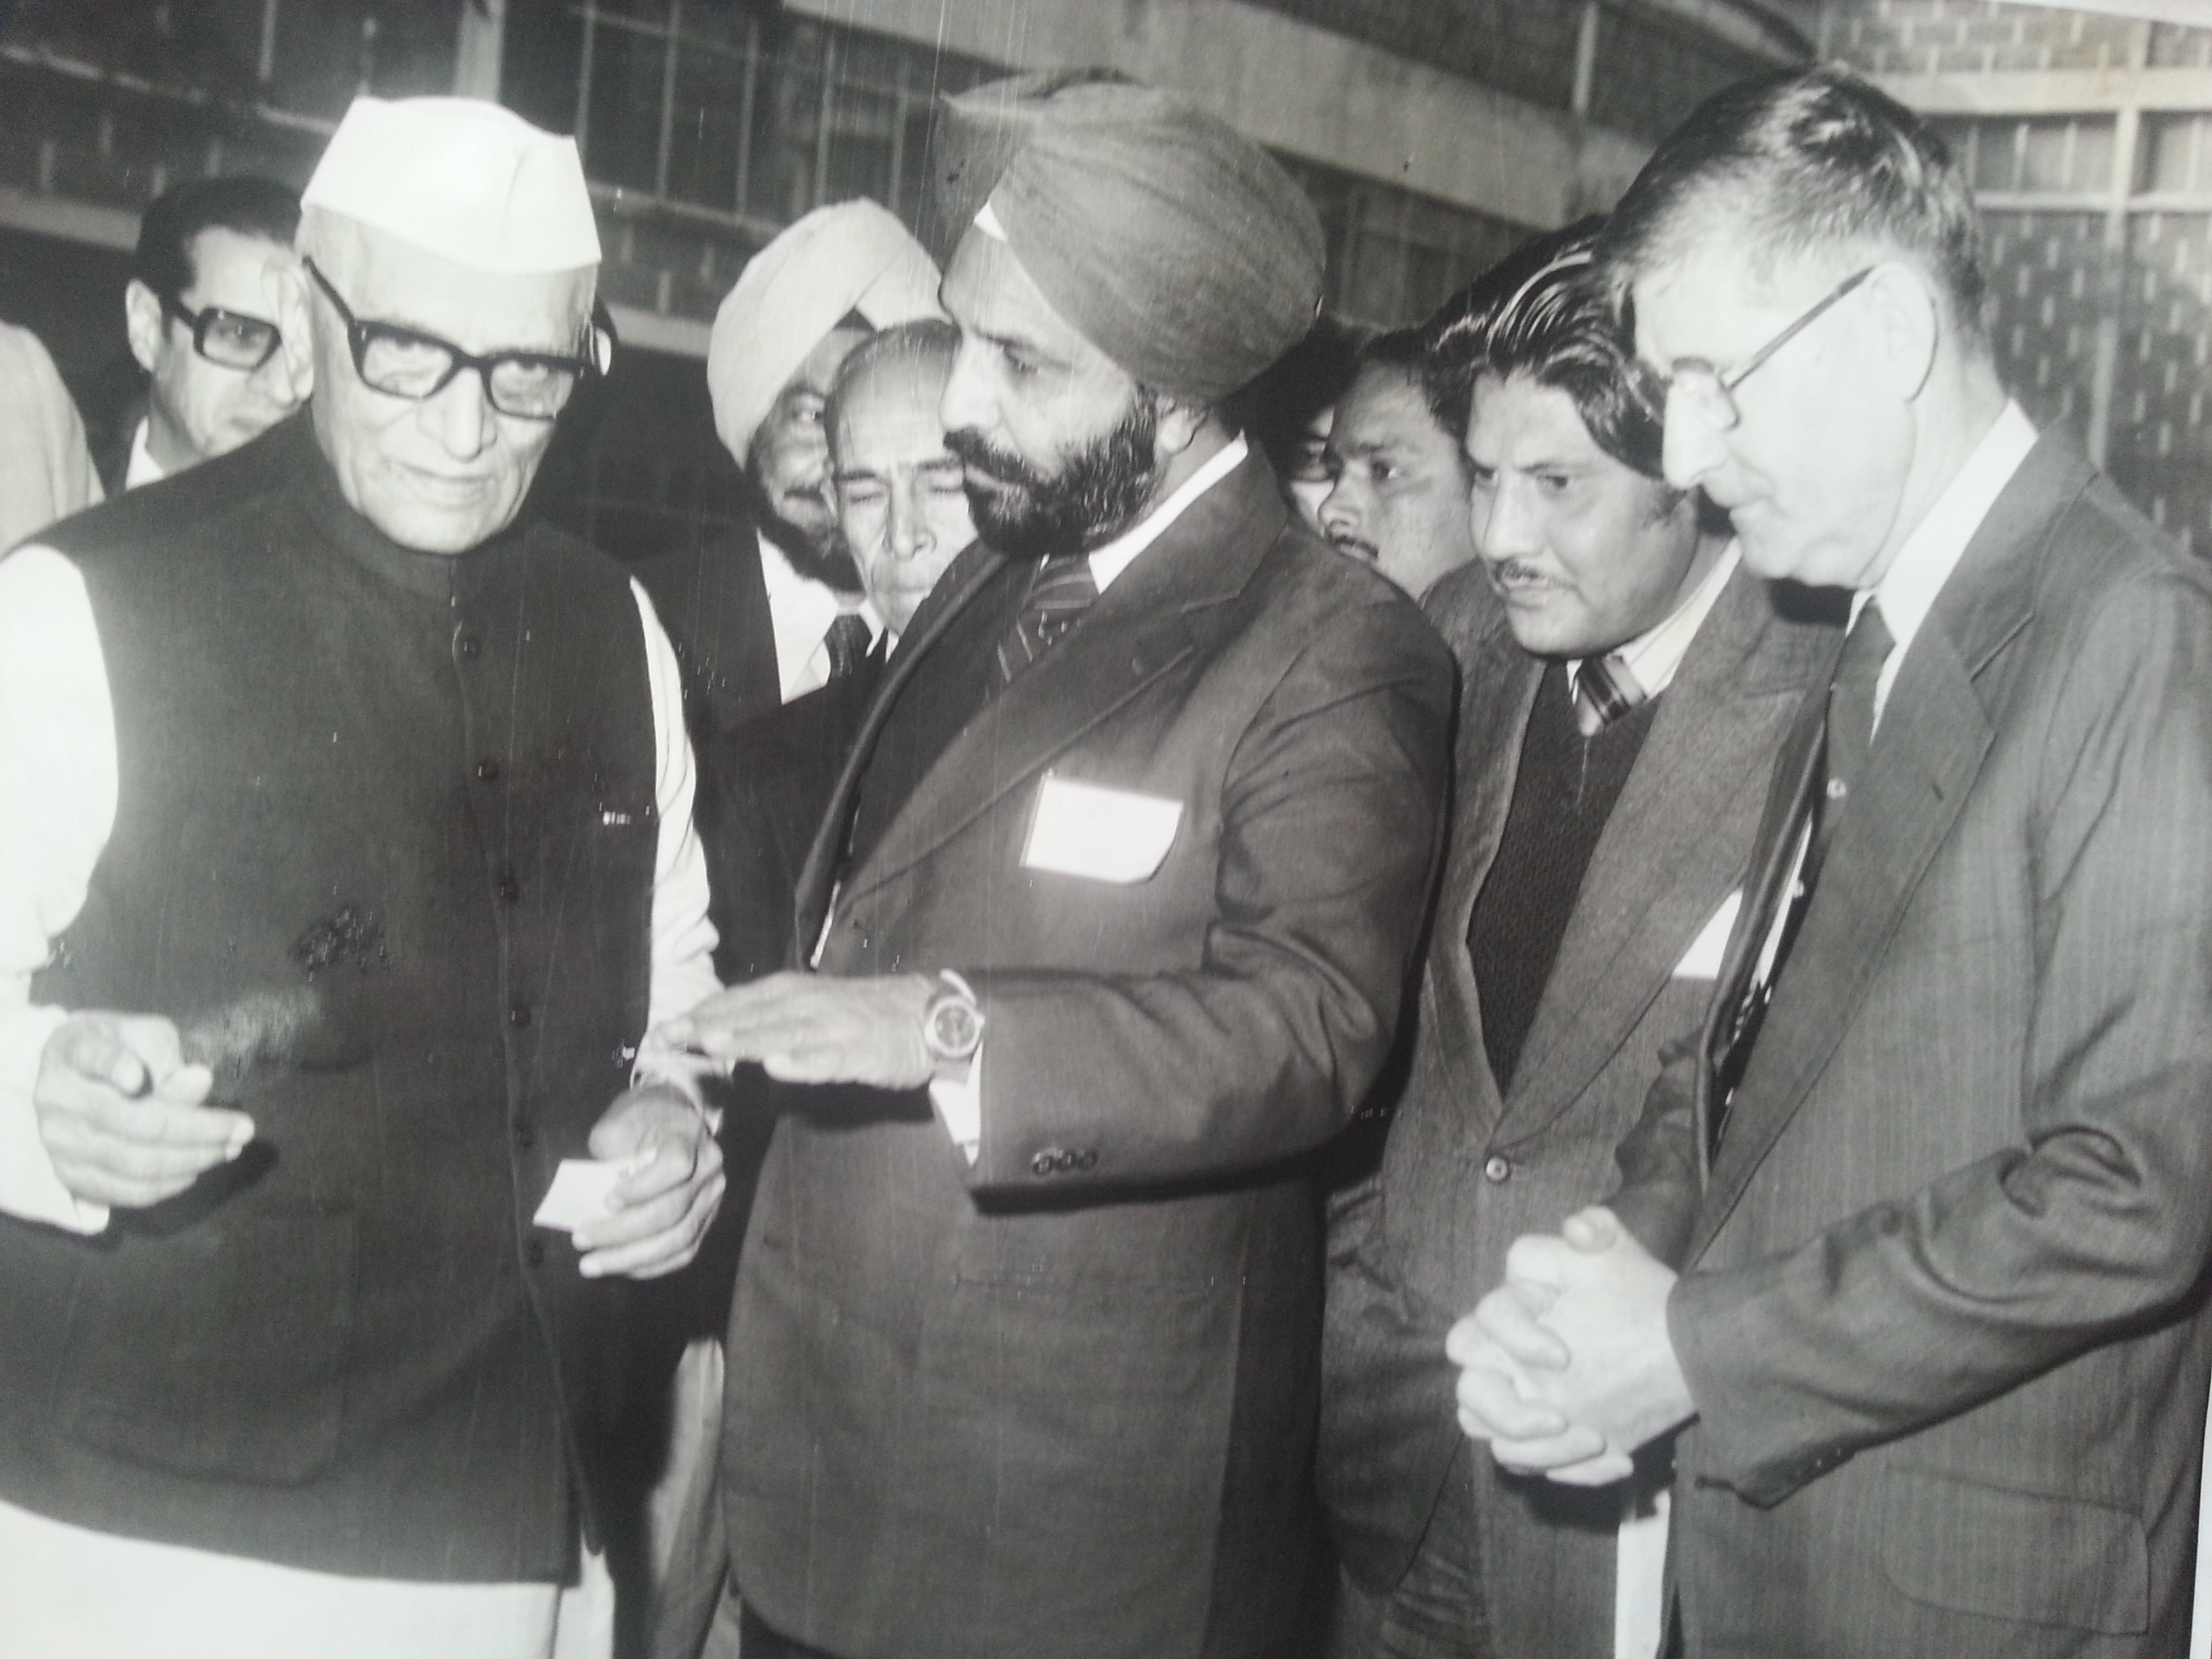 My dad pleading with the then PM Moraji Desai to get his son out of the Navy!